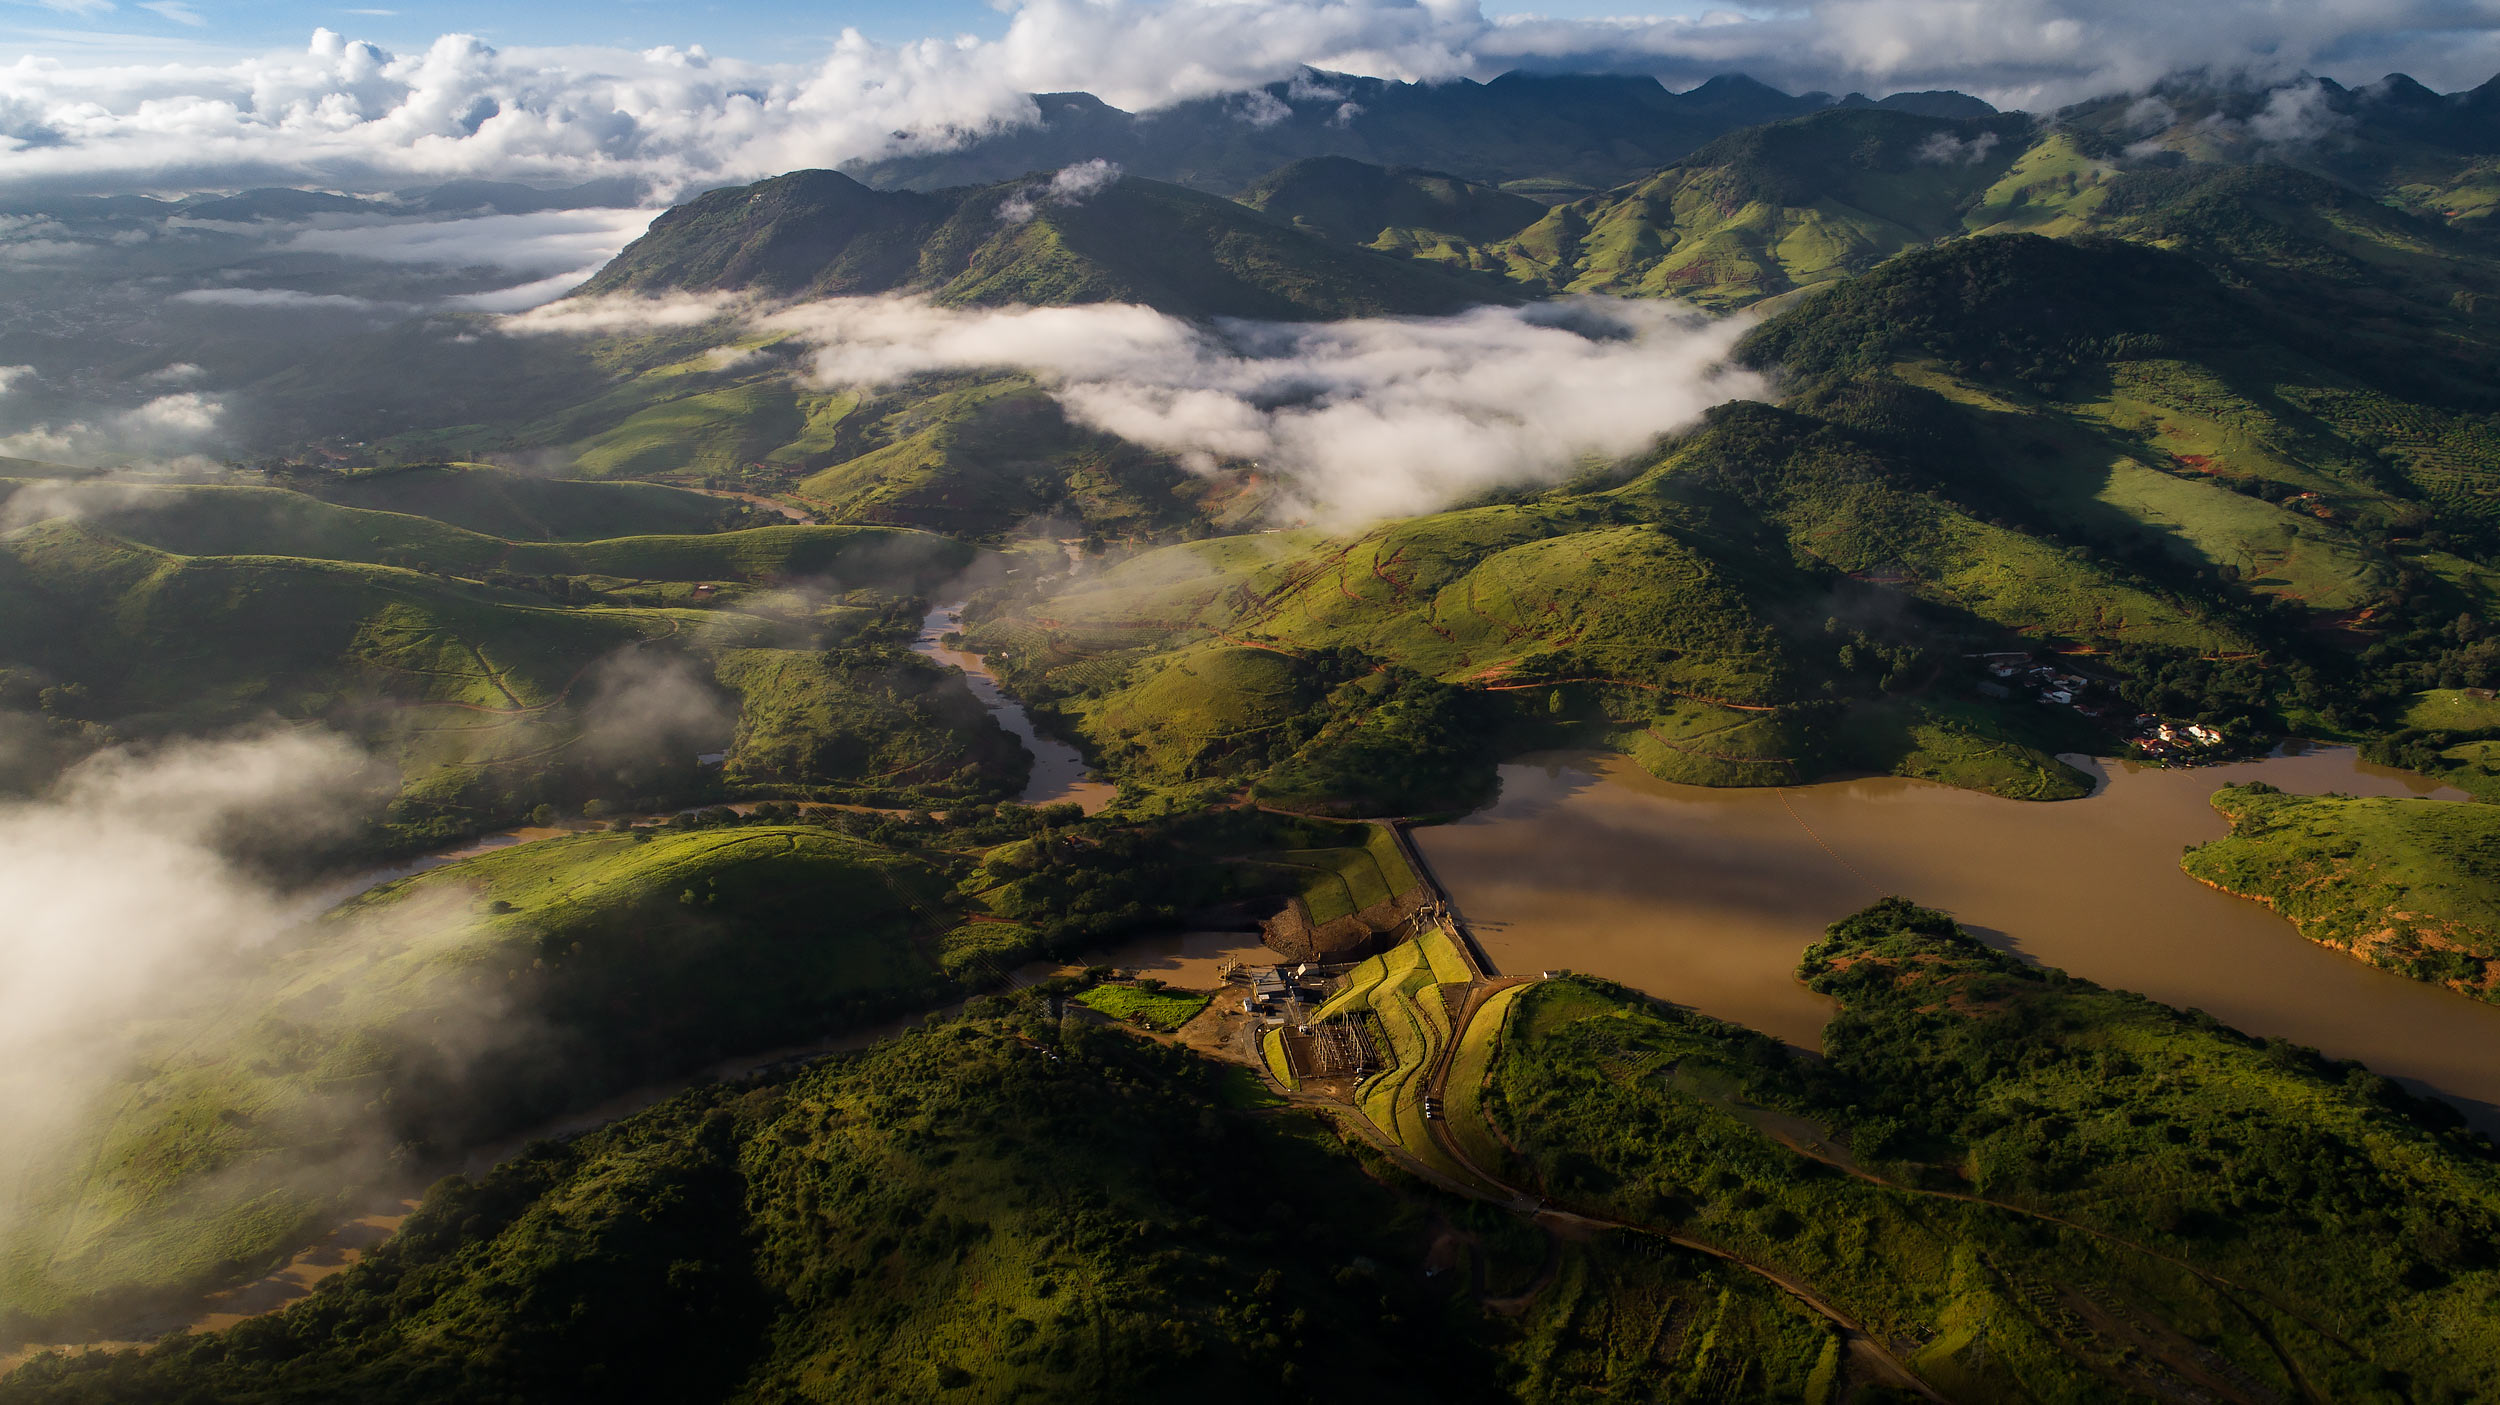 Aerial view of hydroelectric dam in Brazil with green hills and clouds | Scott Gable industrial photographer